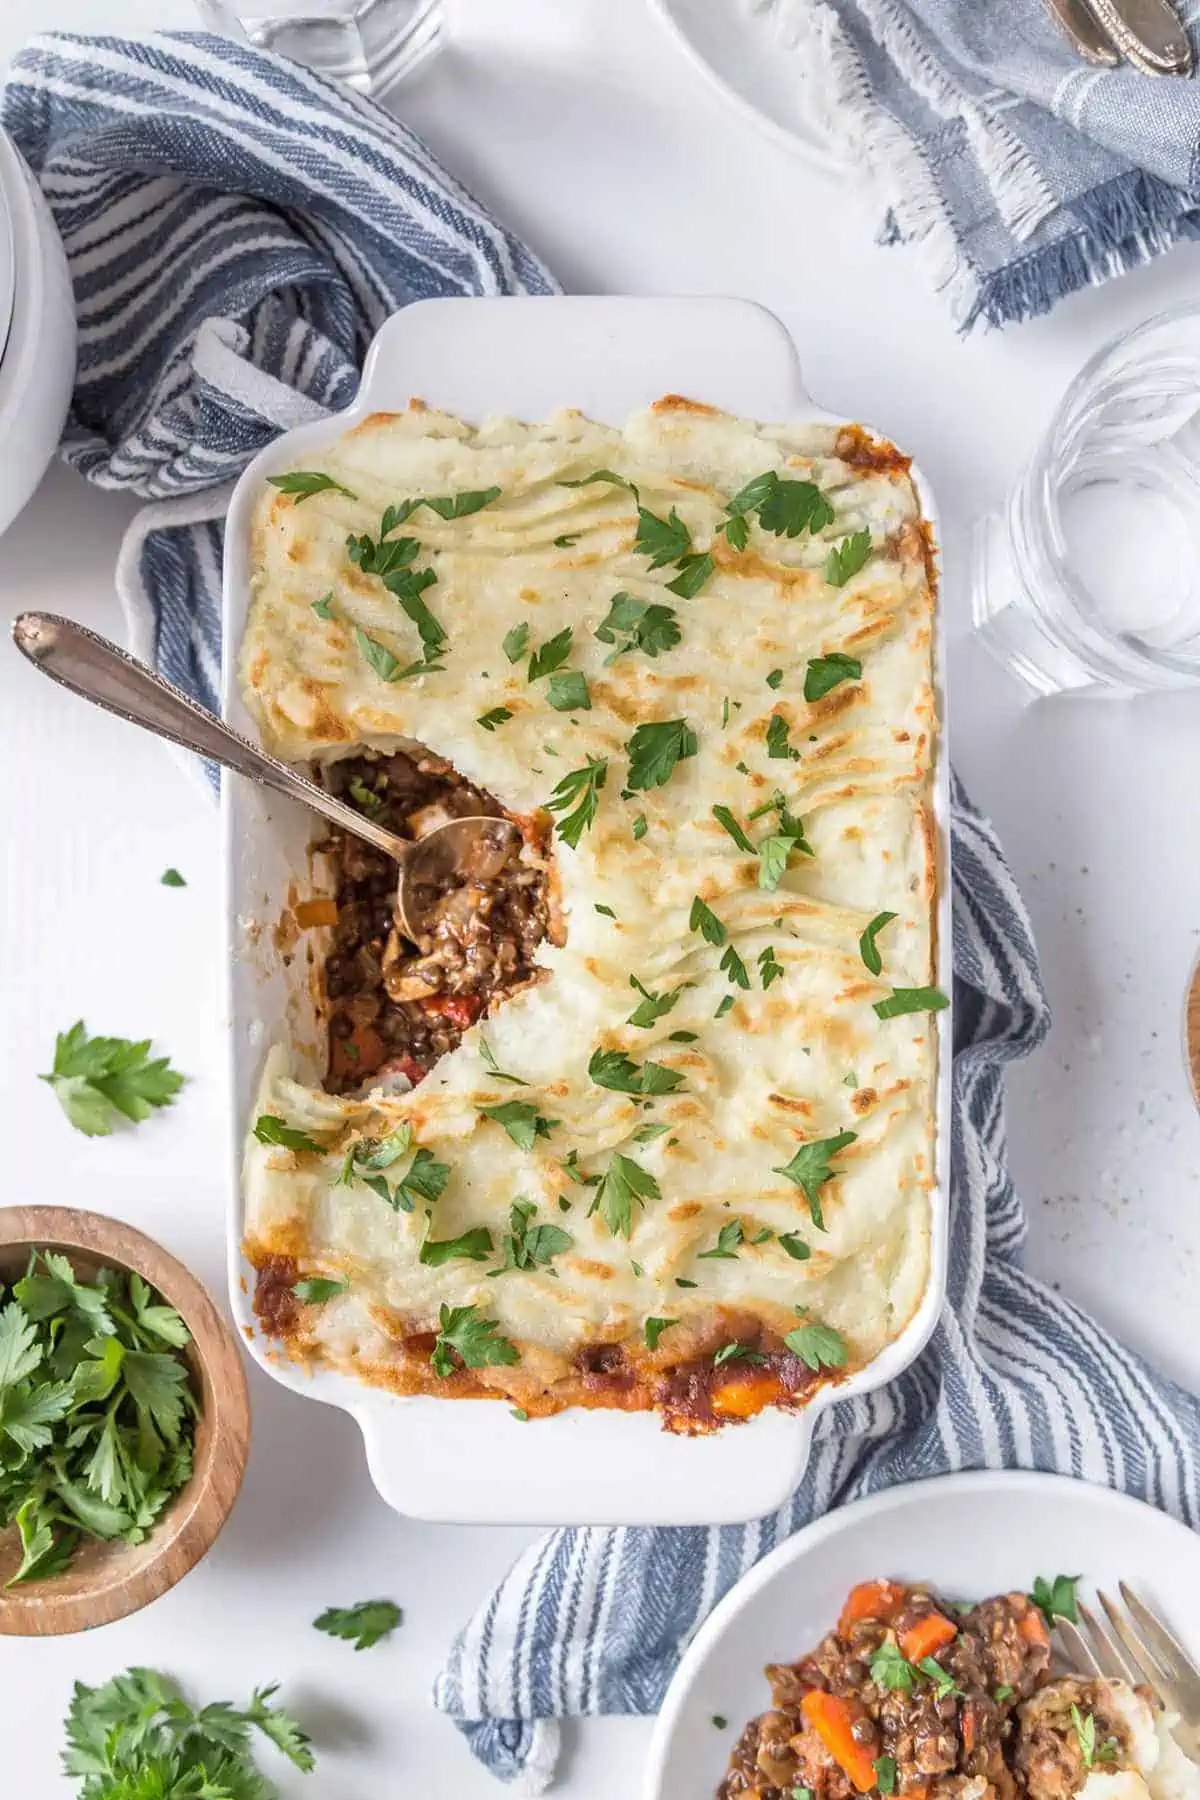 Vegan Shepherd's Pie in a casserole dish with a serving spoon and a serving missing.